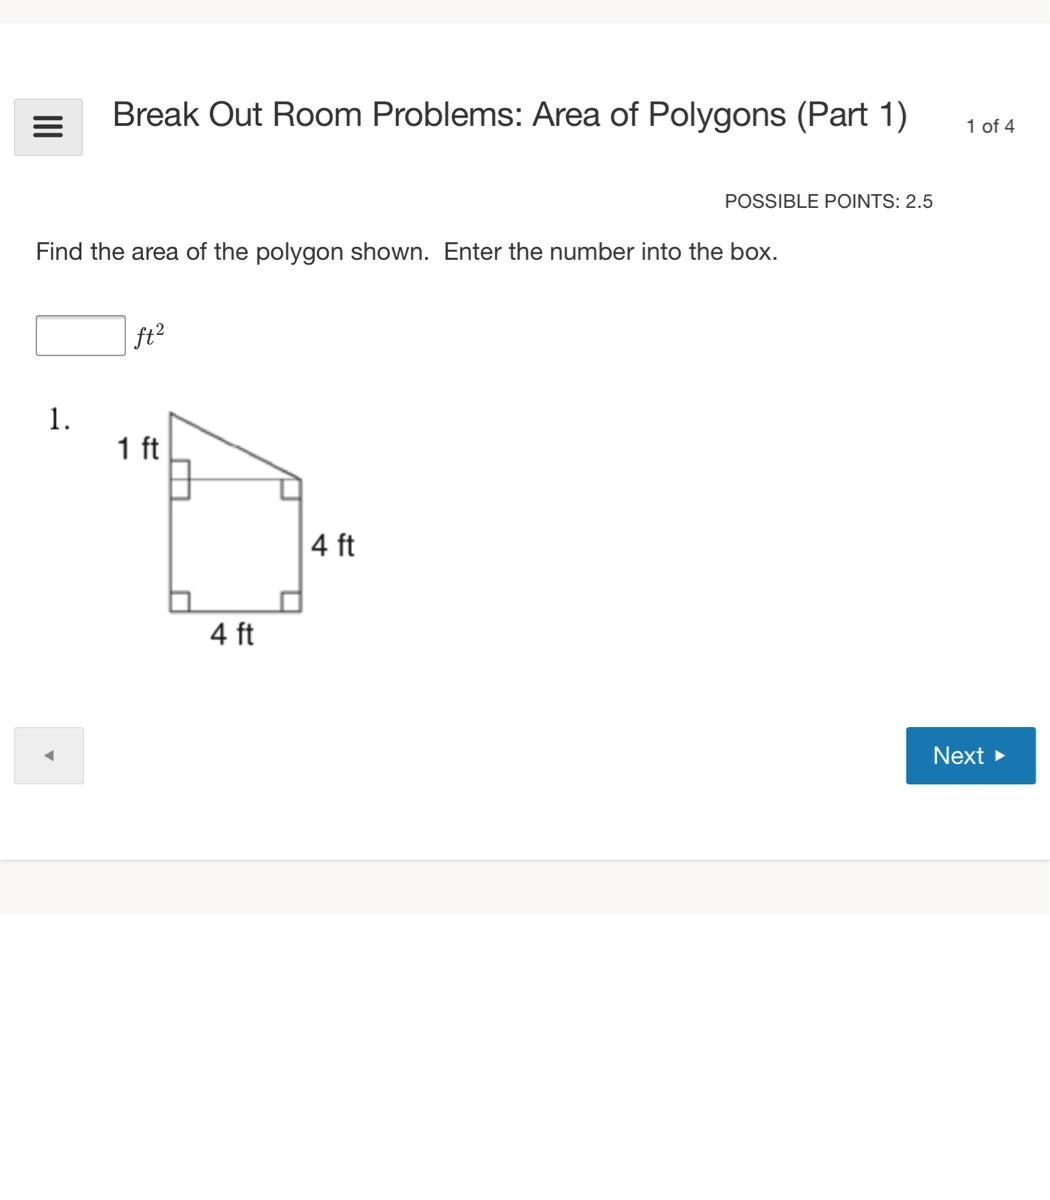 Find The Area Of The Polygon Shown. Enter The Number Into The Box.ft? 1 Ft 4 Ft 4 Ft